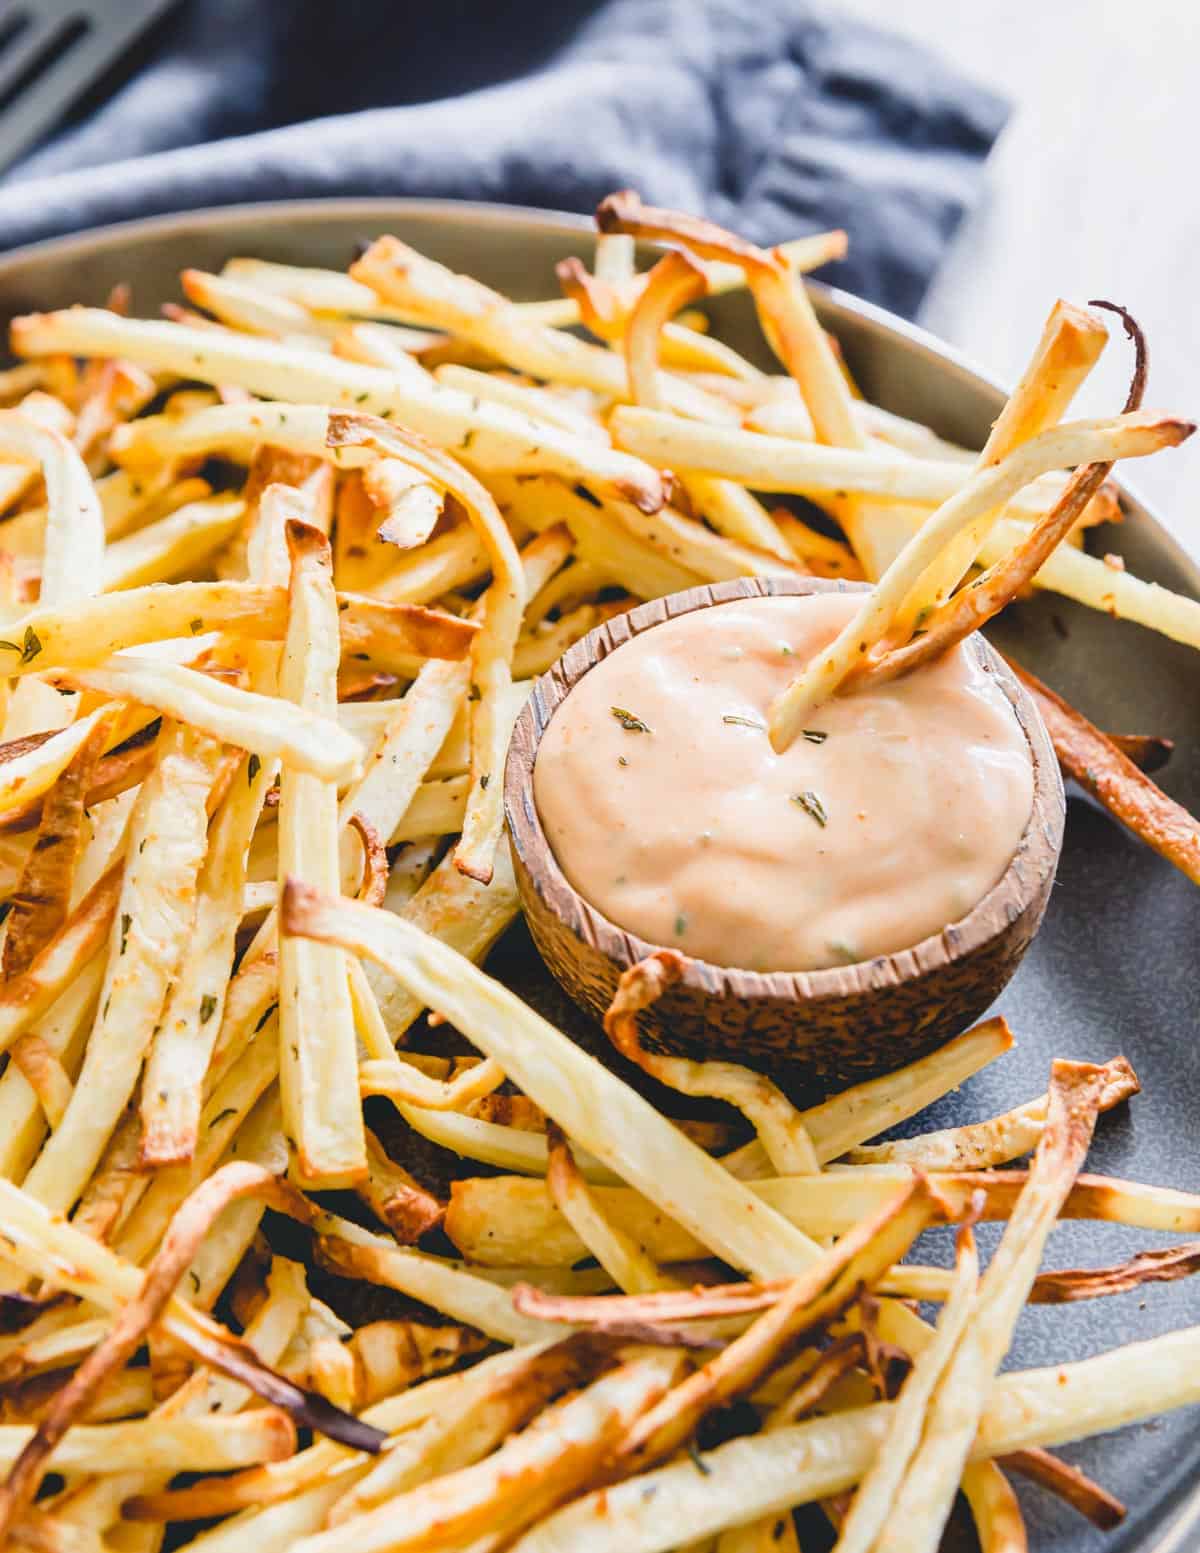 Crispy parsnip fries dipped in a fry sauce on a plate.